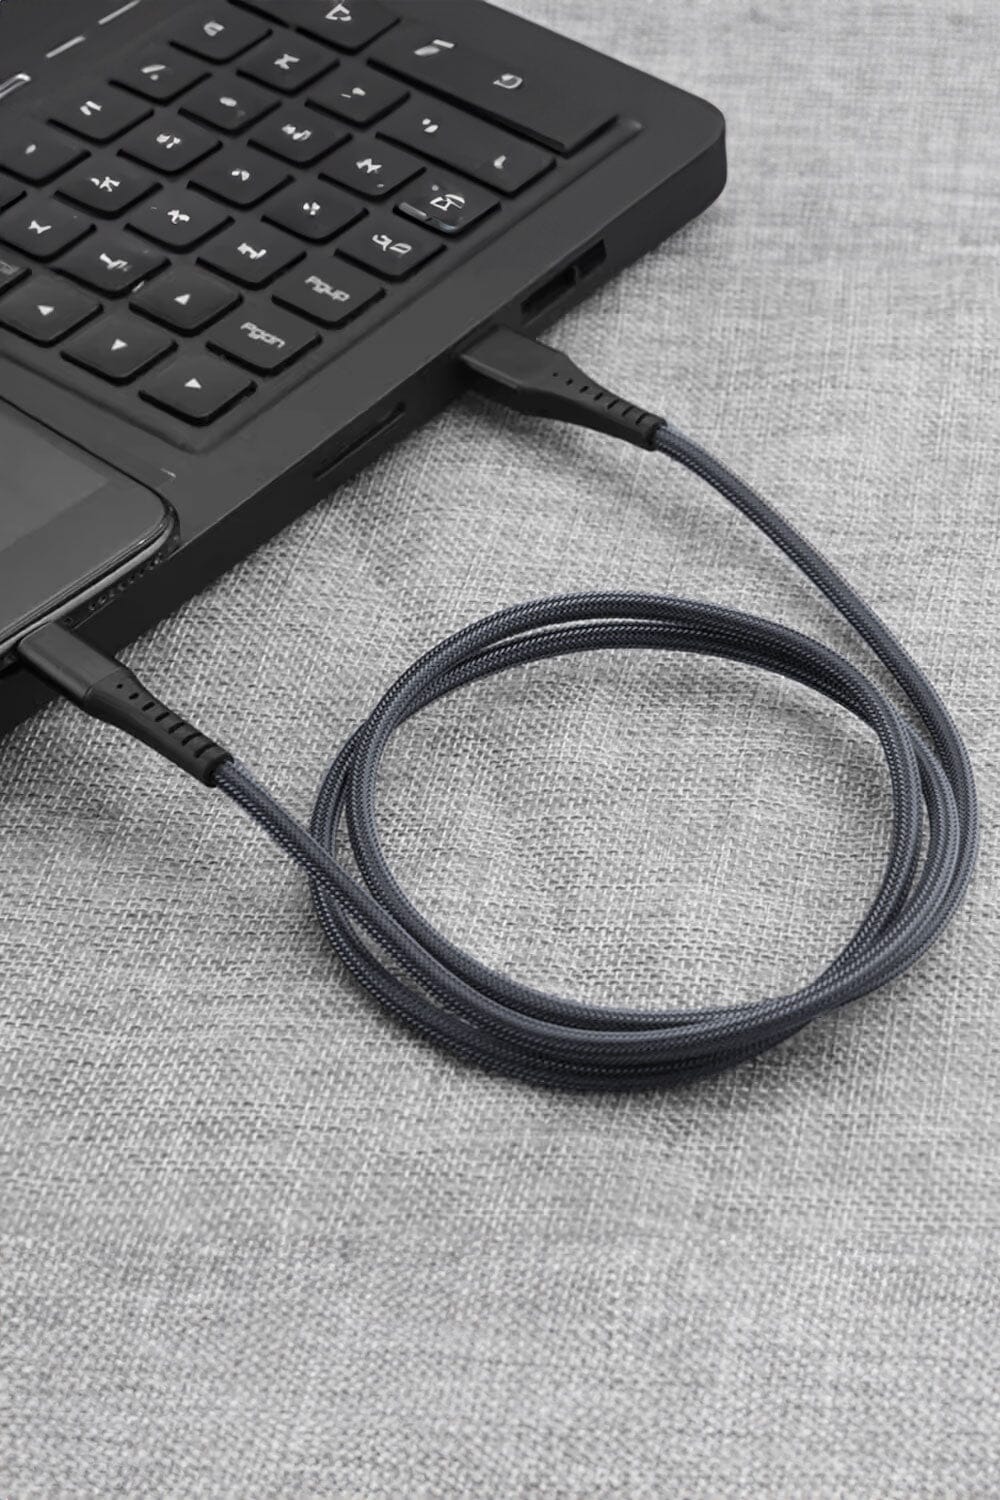 Plus Android Charging Cable Mobile Accessories SDQ 